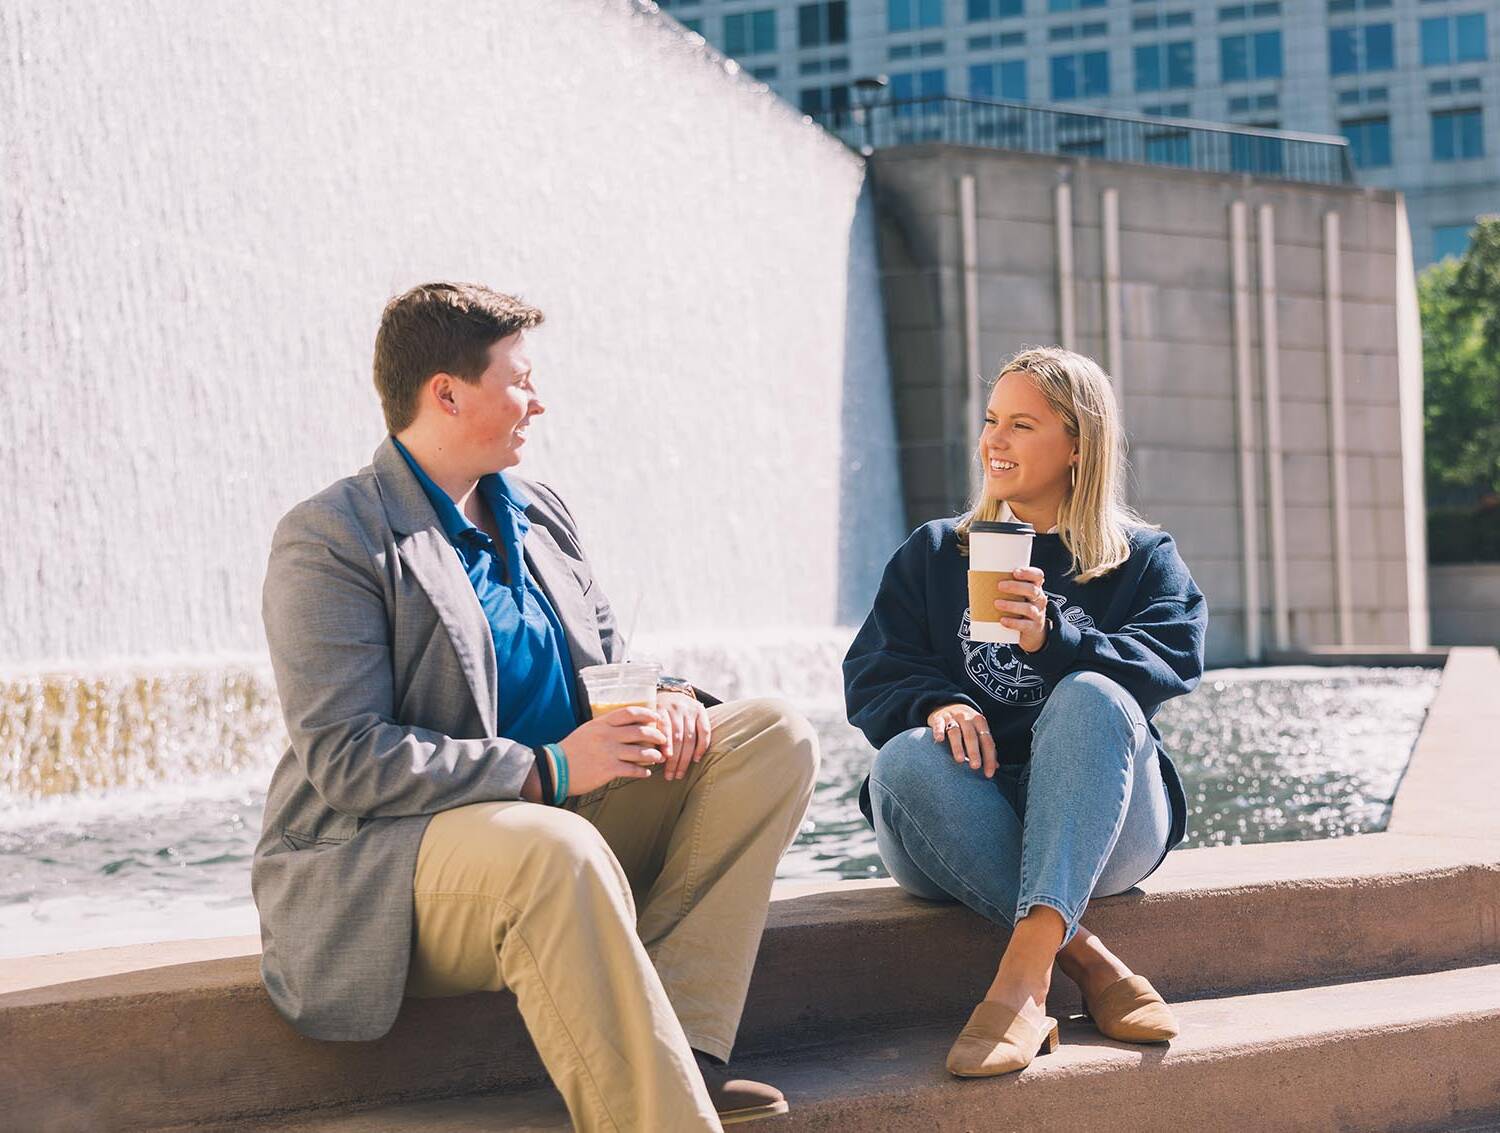 Two people enjoying a coffee sitting on stairs and chatting